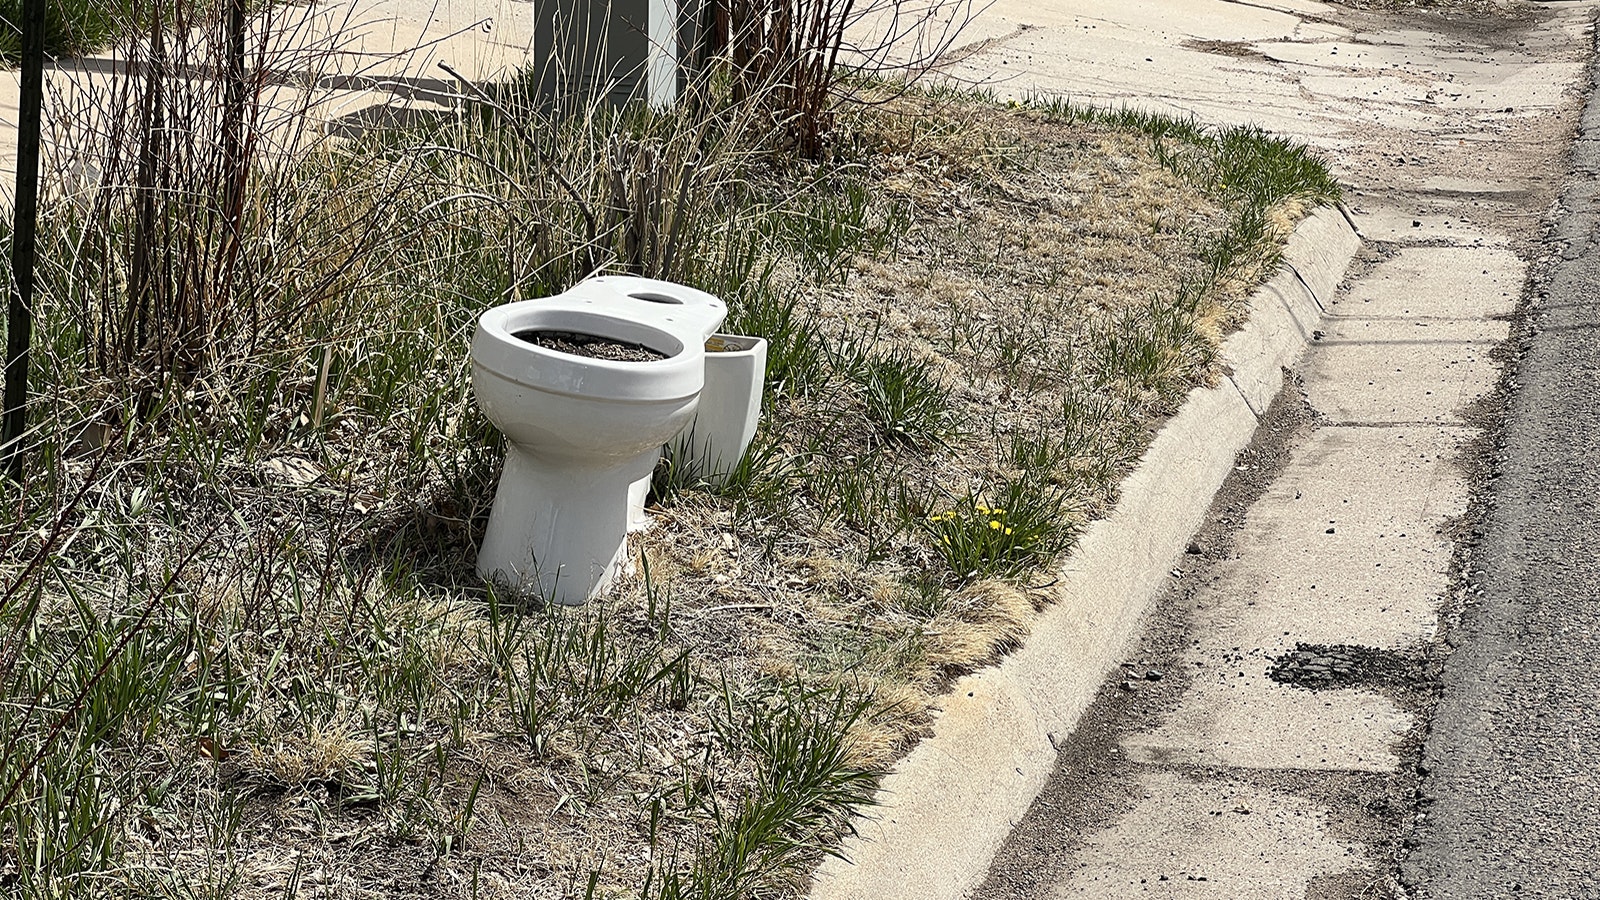 For more than two years, this old discarded toilet sat in the public right of way along Russell Avenue in Laramie. Someone would occasionally plant flowers in it.